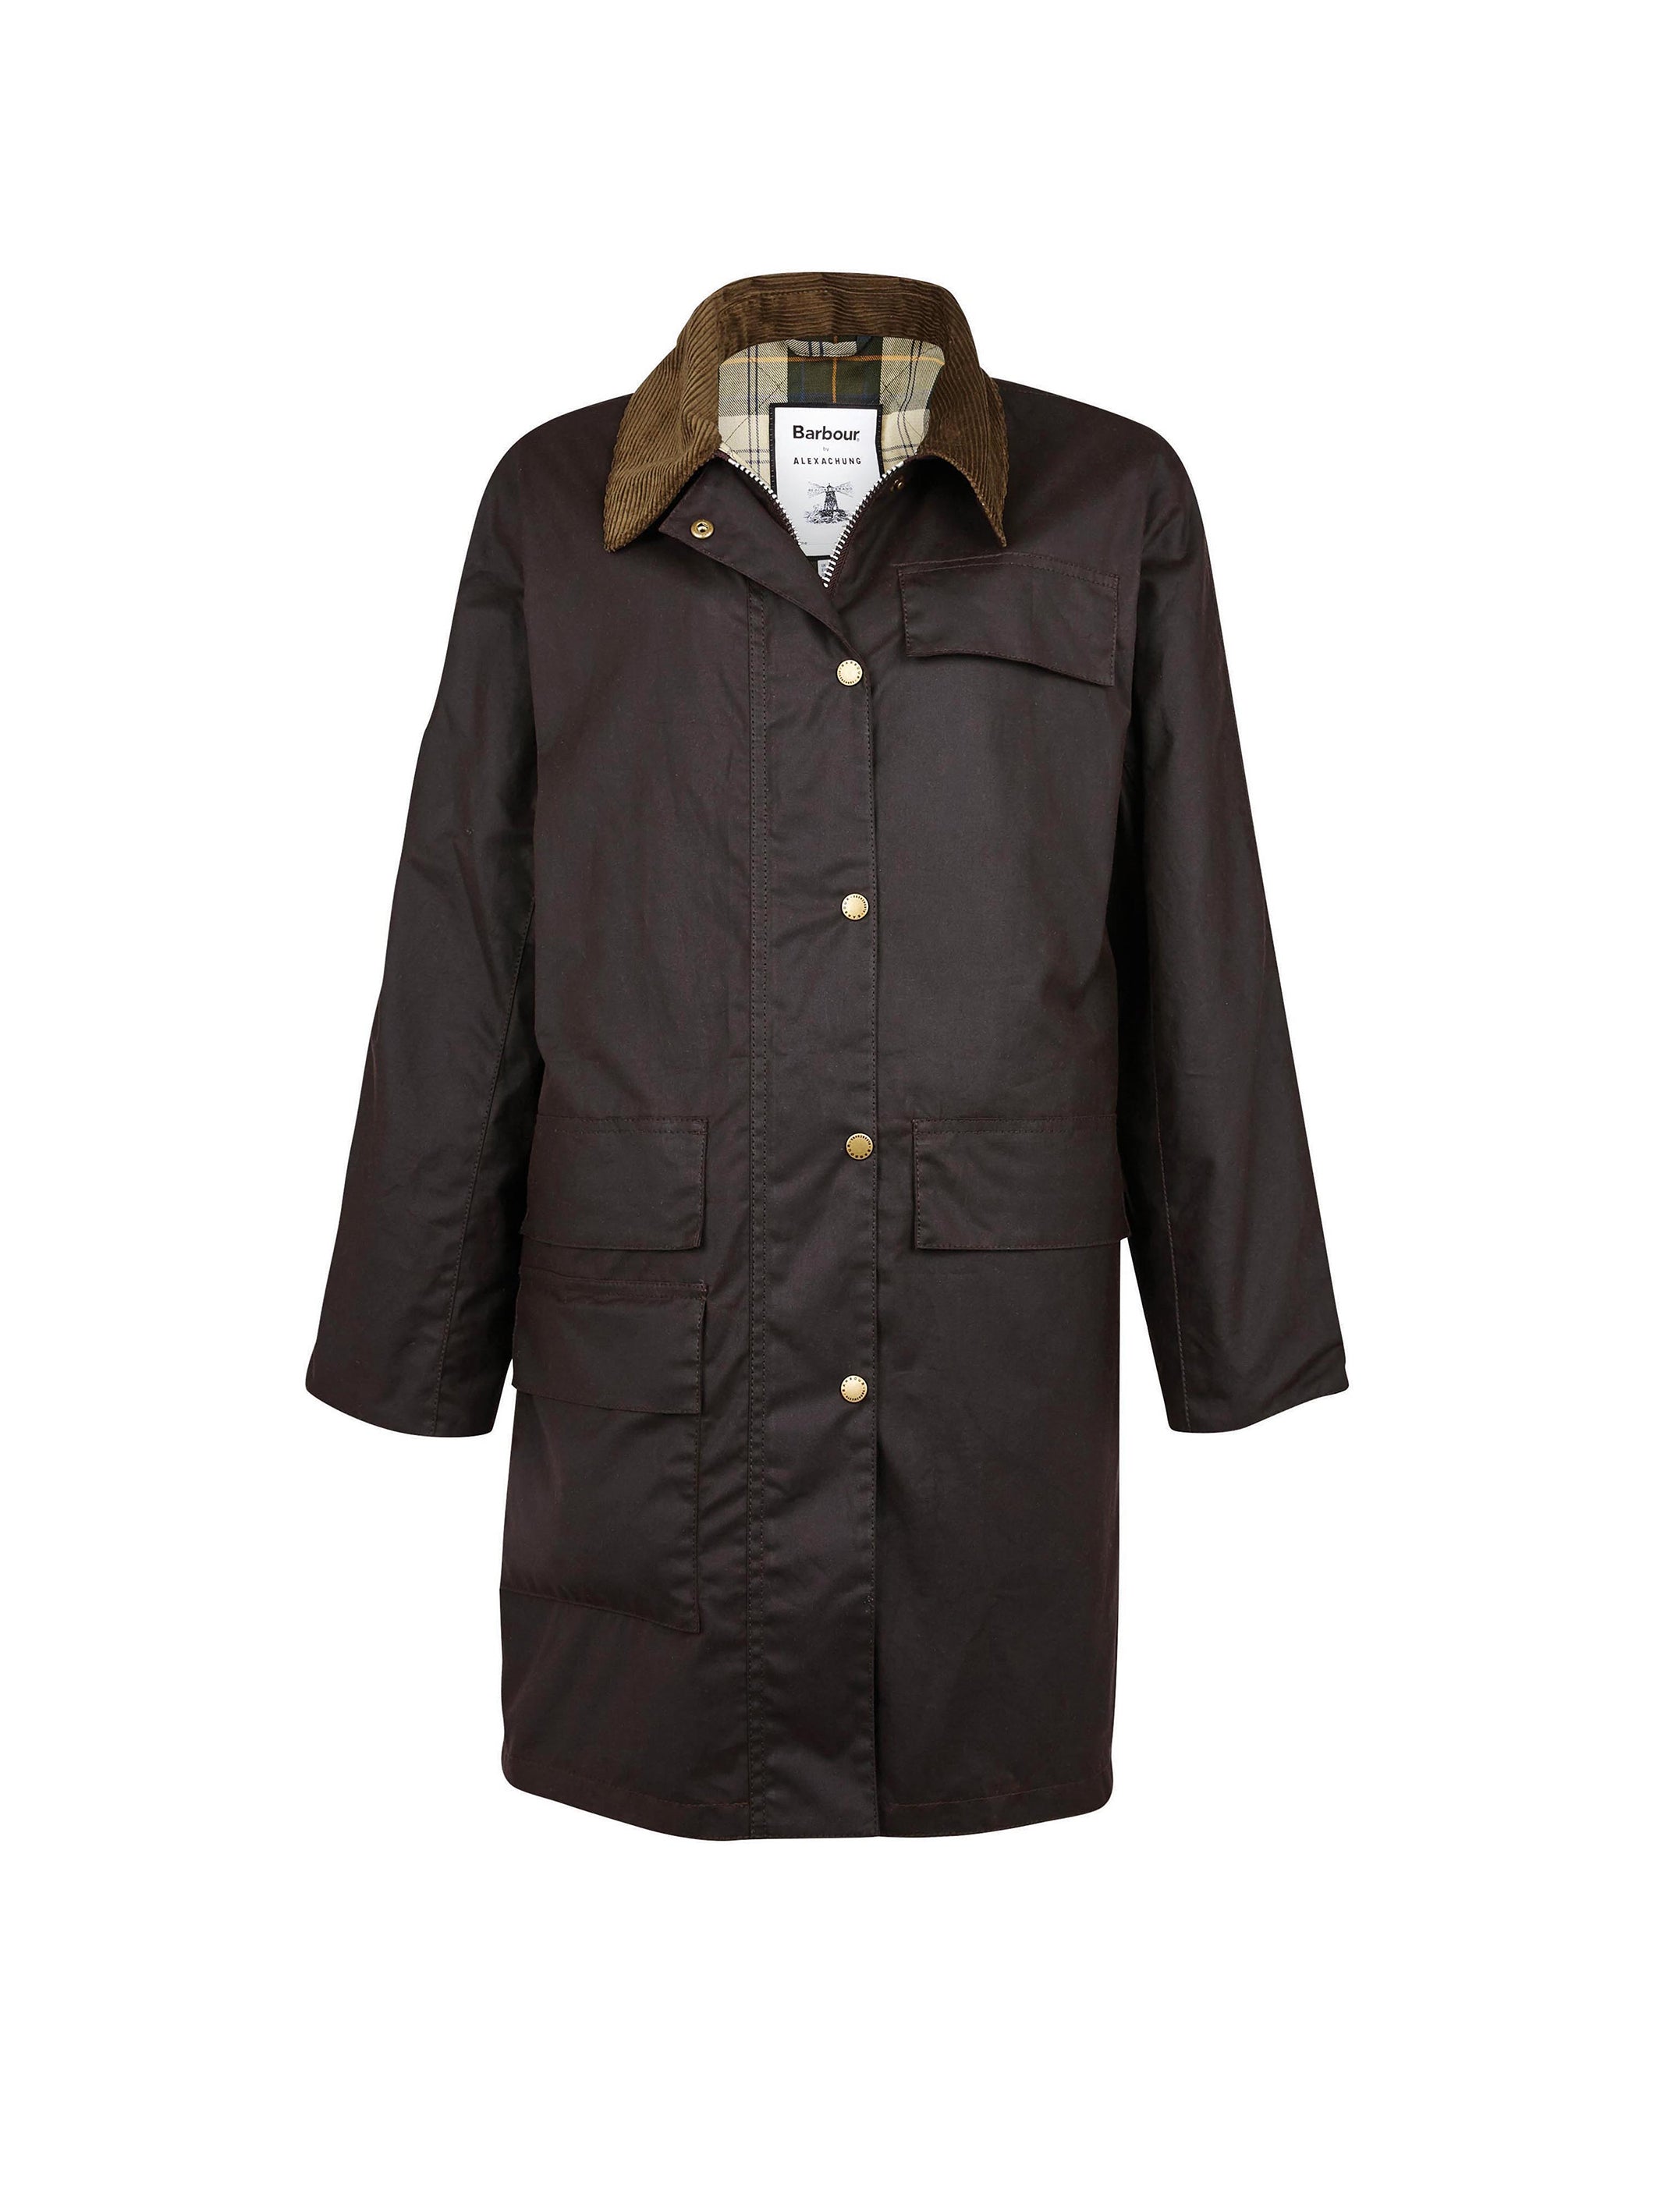 brown barbour